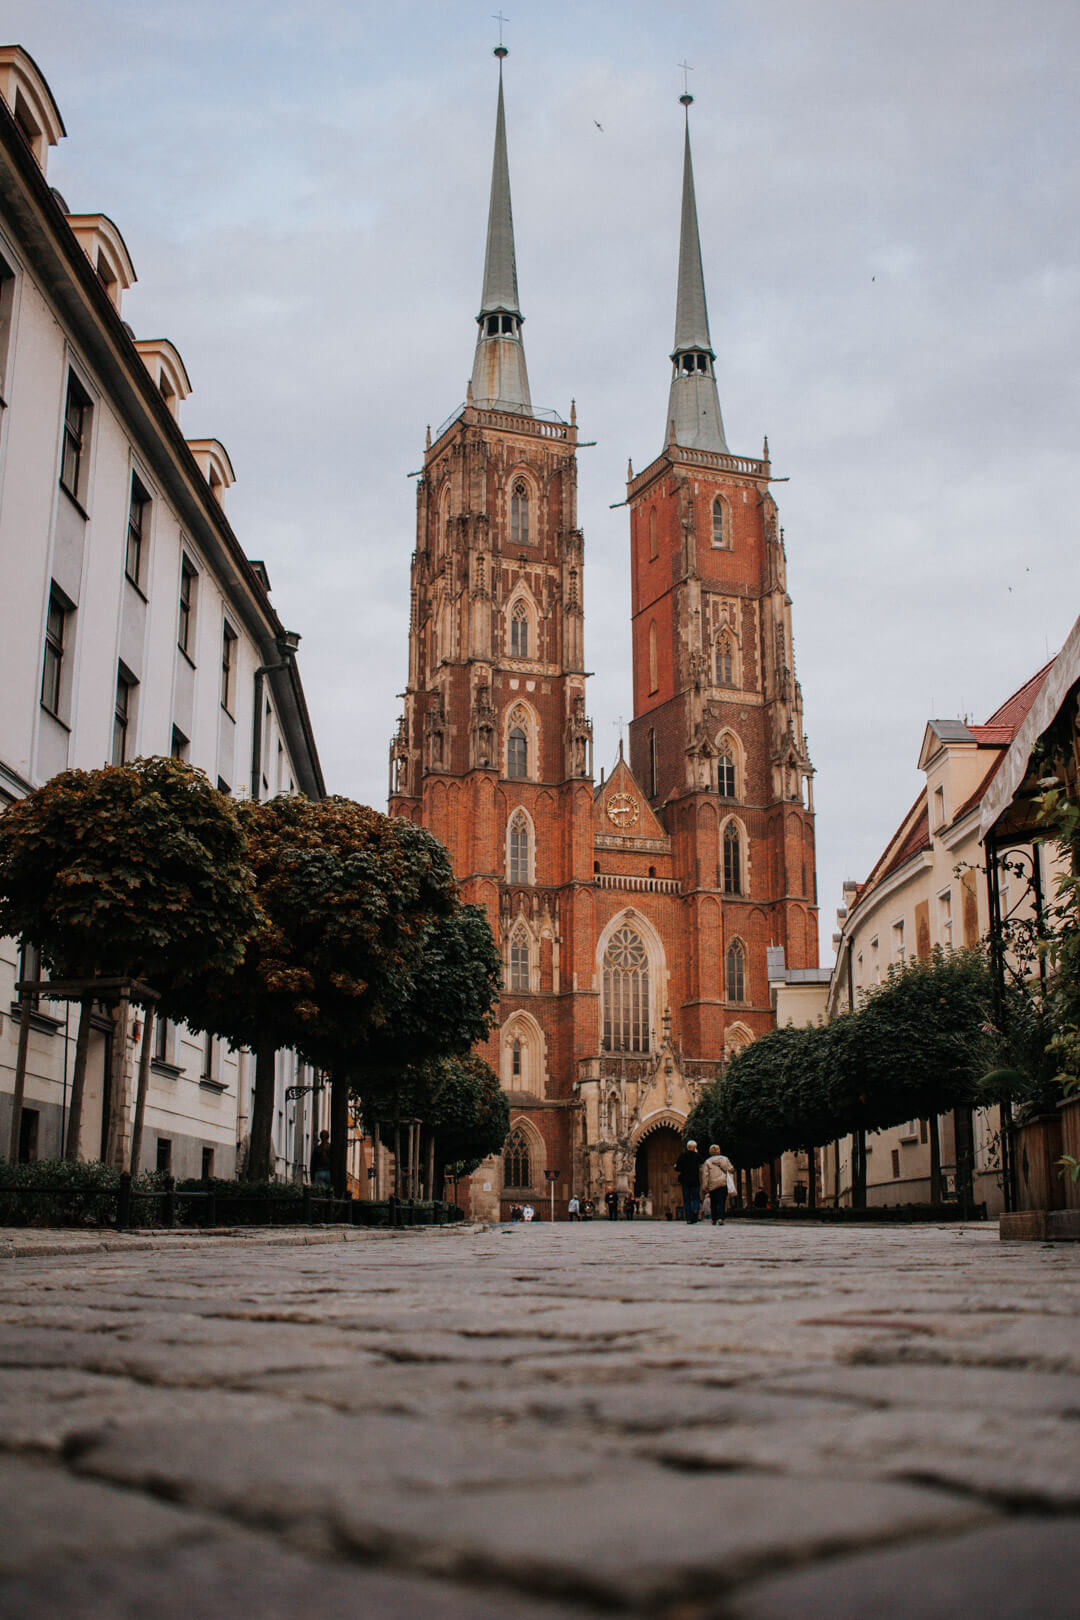 A Weekend in Wroclaw, Poland | ChelseaDinen.com